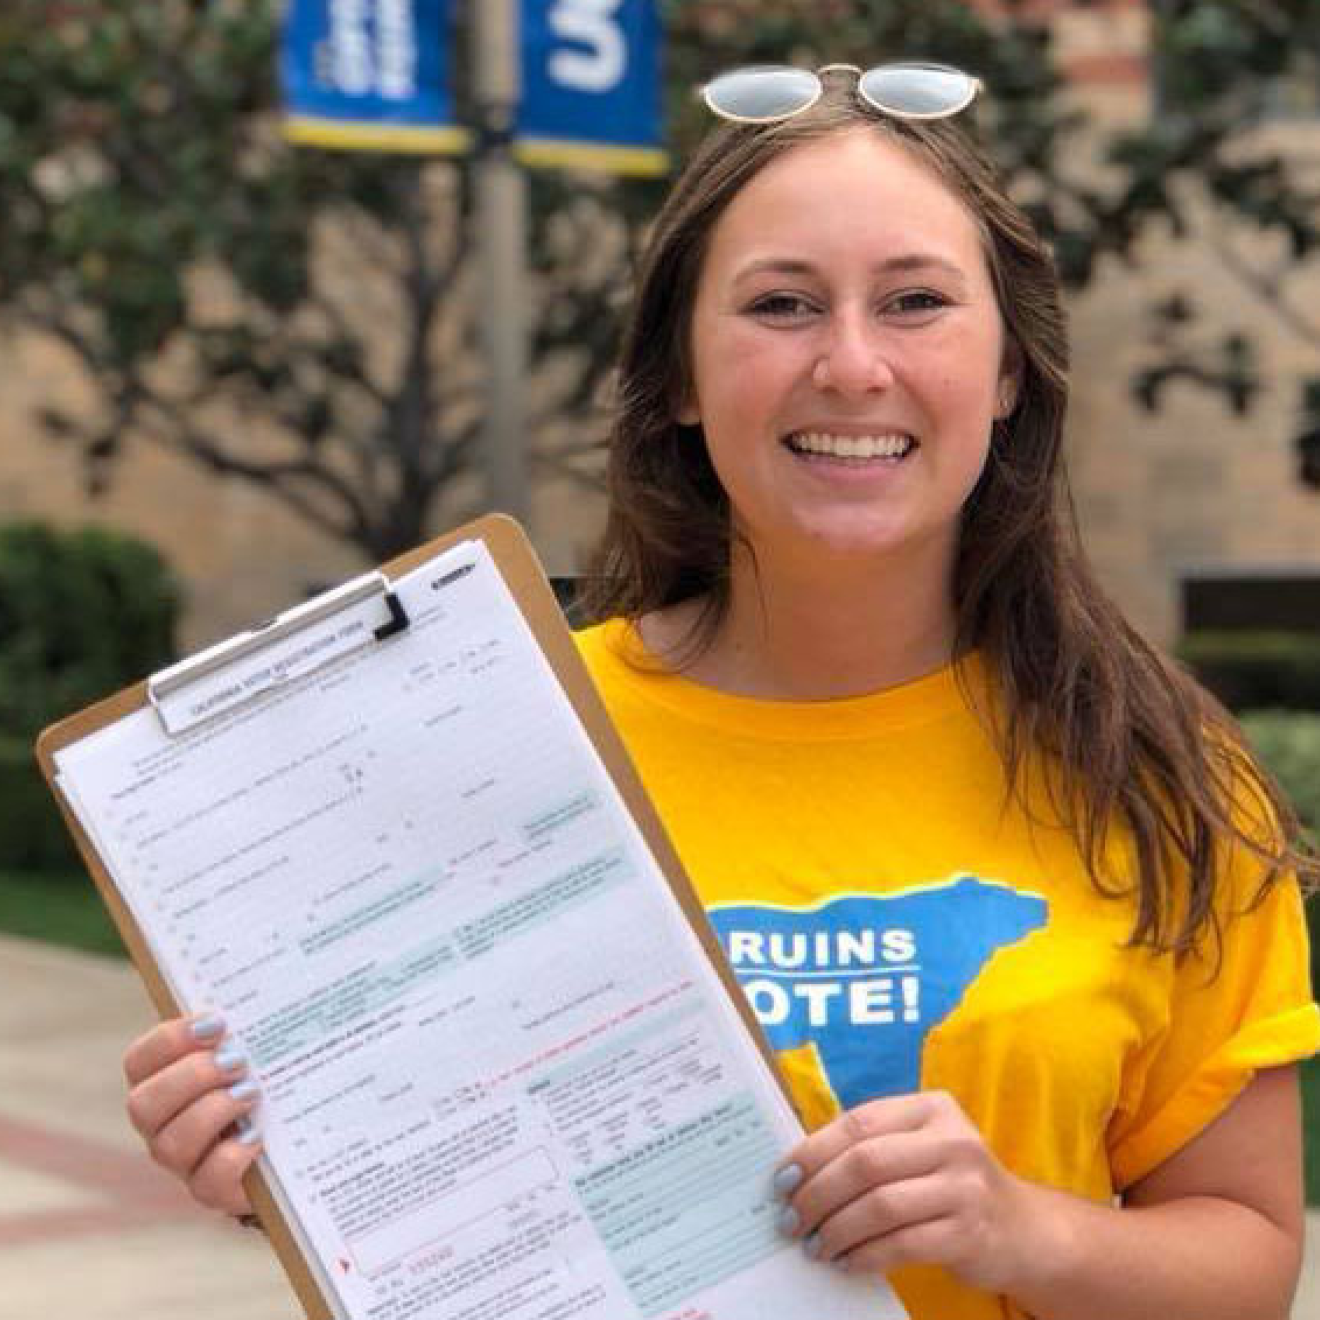 Young woman with Bruins Vote T-shirt holds up voter registration form